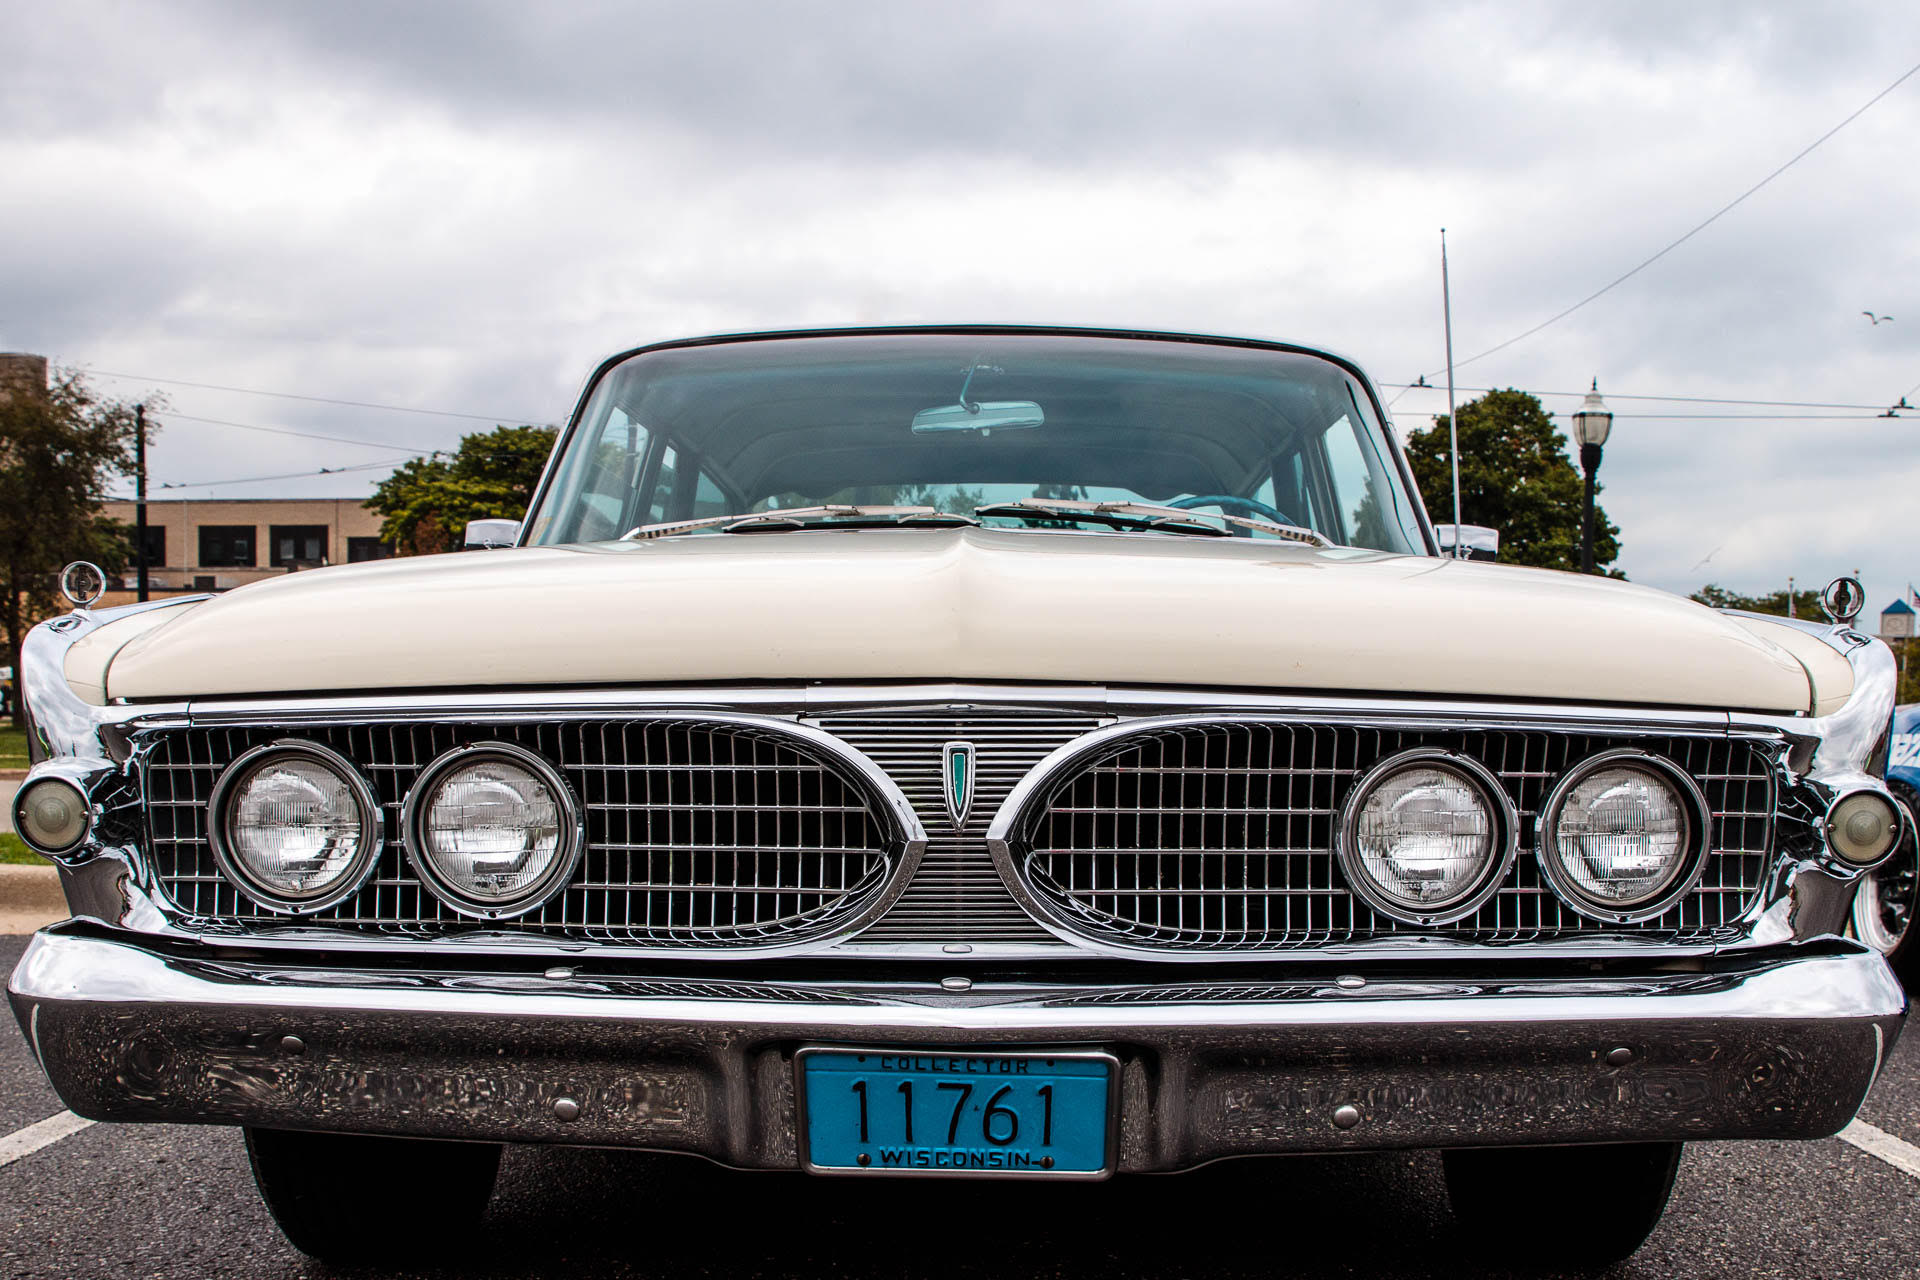 The Edsel by Kathy Brand